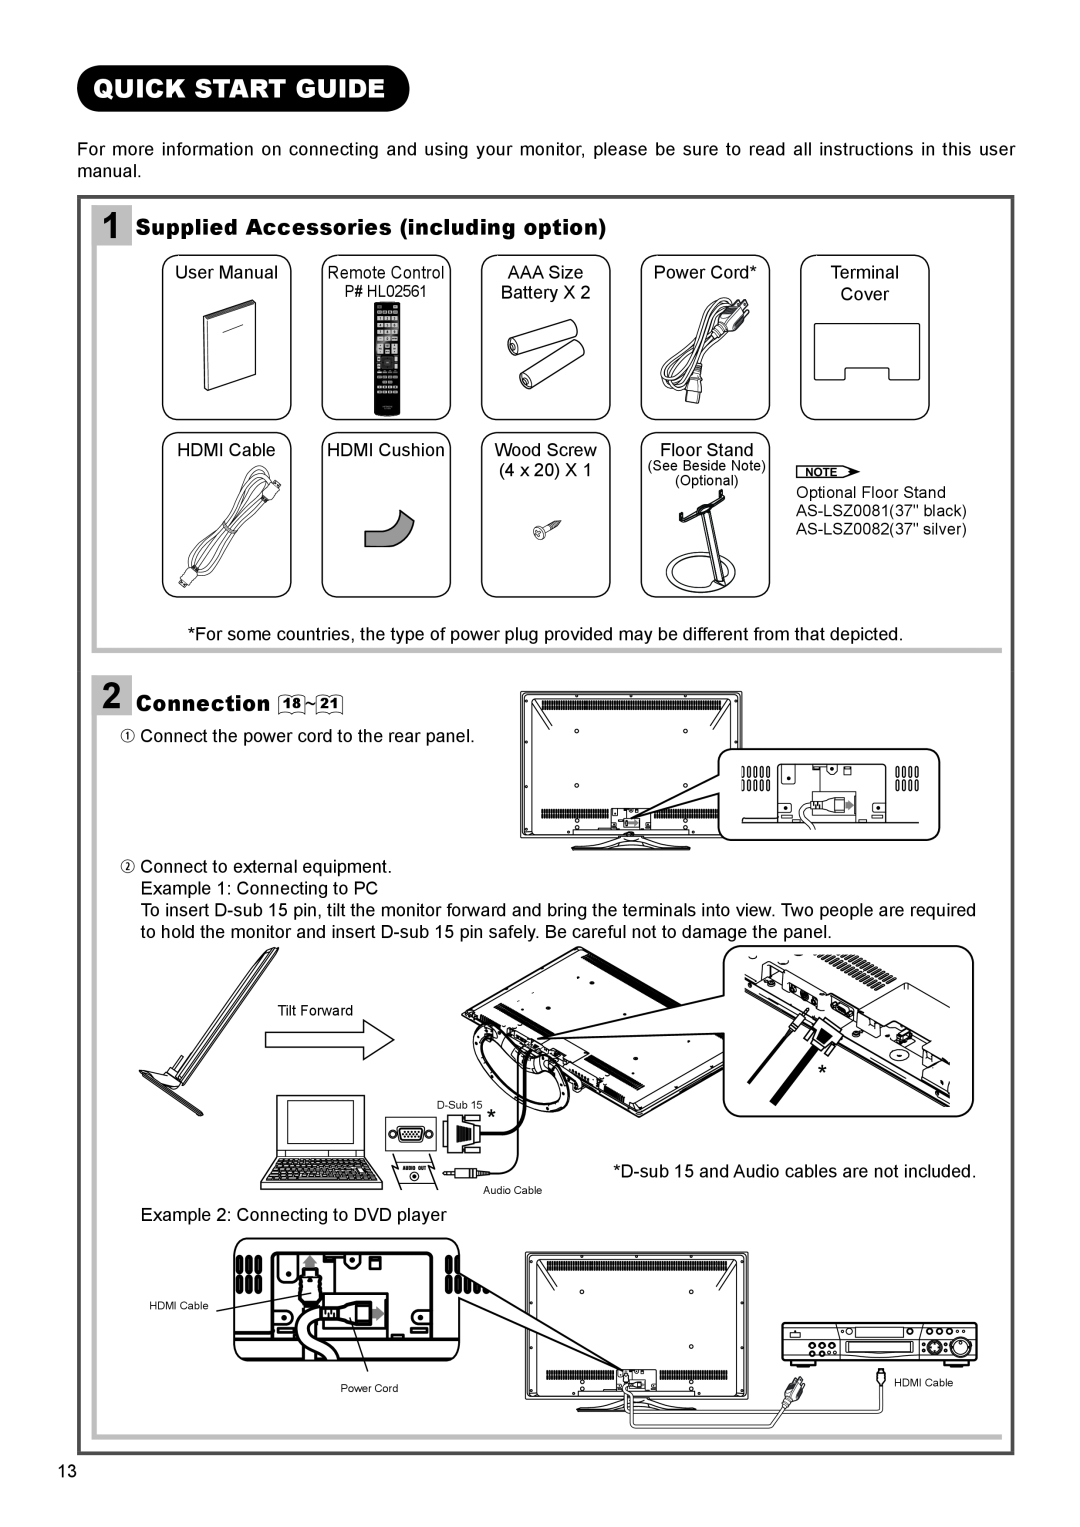 Hitachi UT42X902, UT47X902, UT37X902 manual Quick Start Guide, Supplied Accessories including option, Connection 18 ~ 